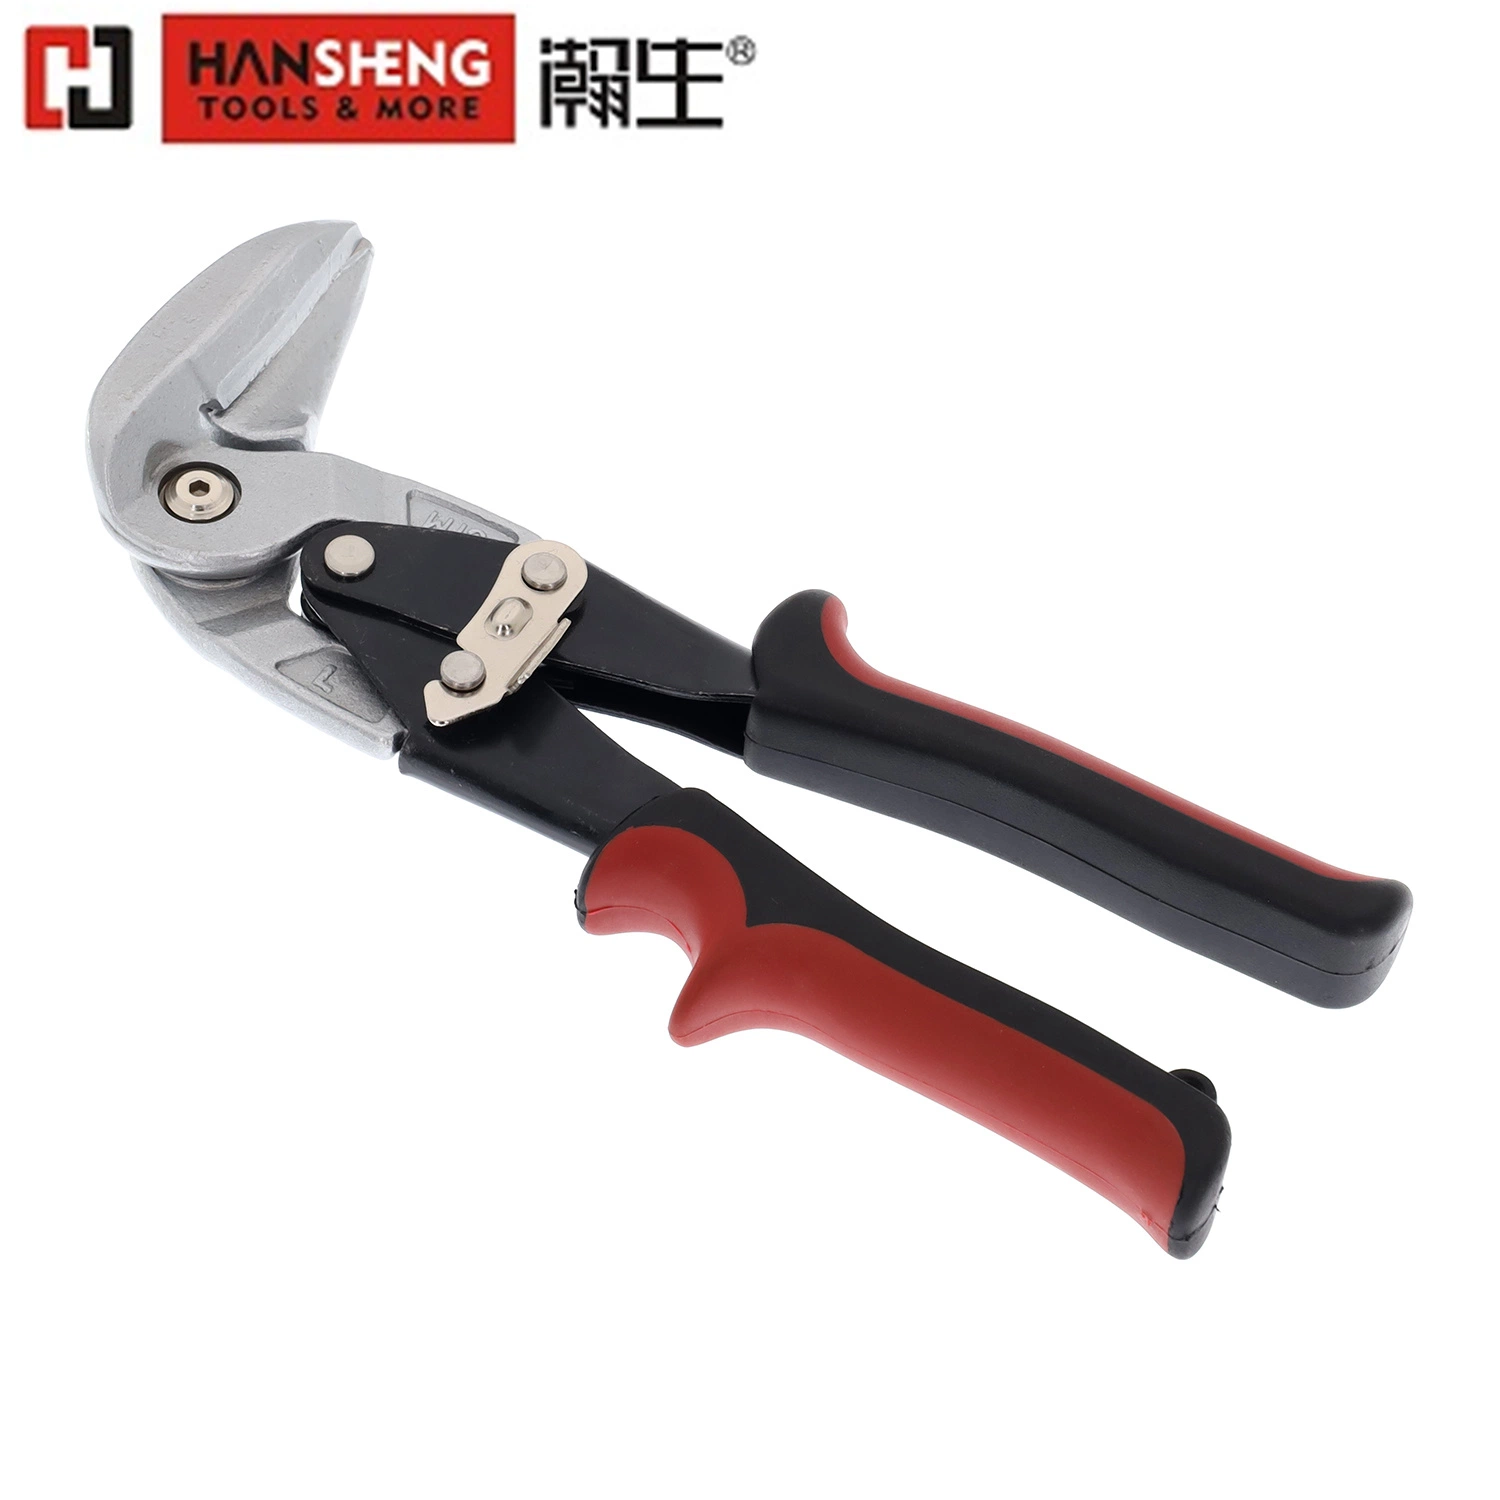 Professional Hand Tools Made of Carbon Steel, Cr-V, Cr-Mo, Matt Finish, Nickel Plated, TPR Handle, Straight, Right and Left, Heavy Duty, Aviation Snips